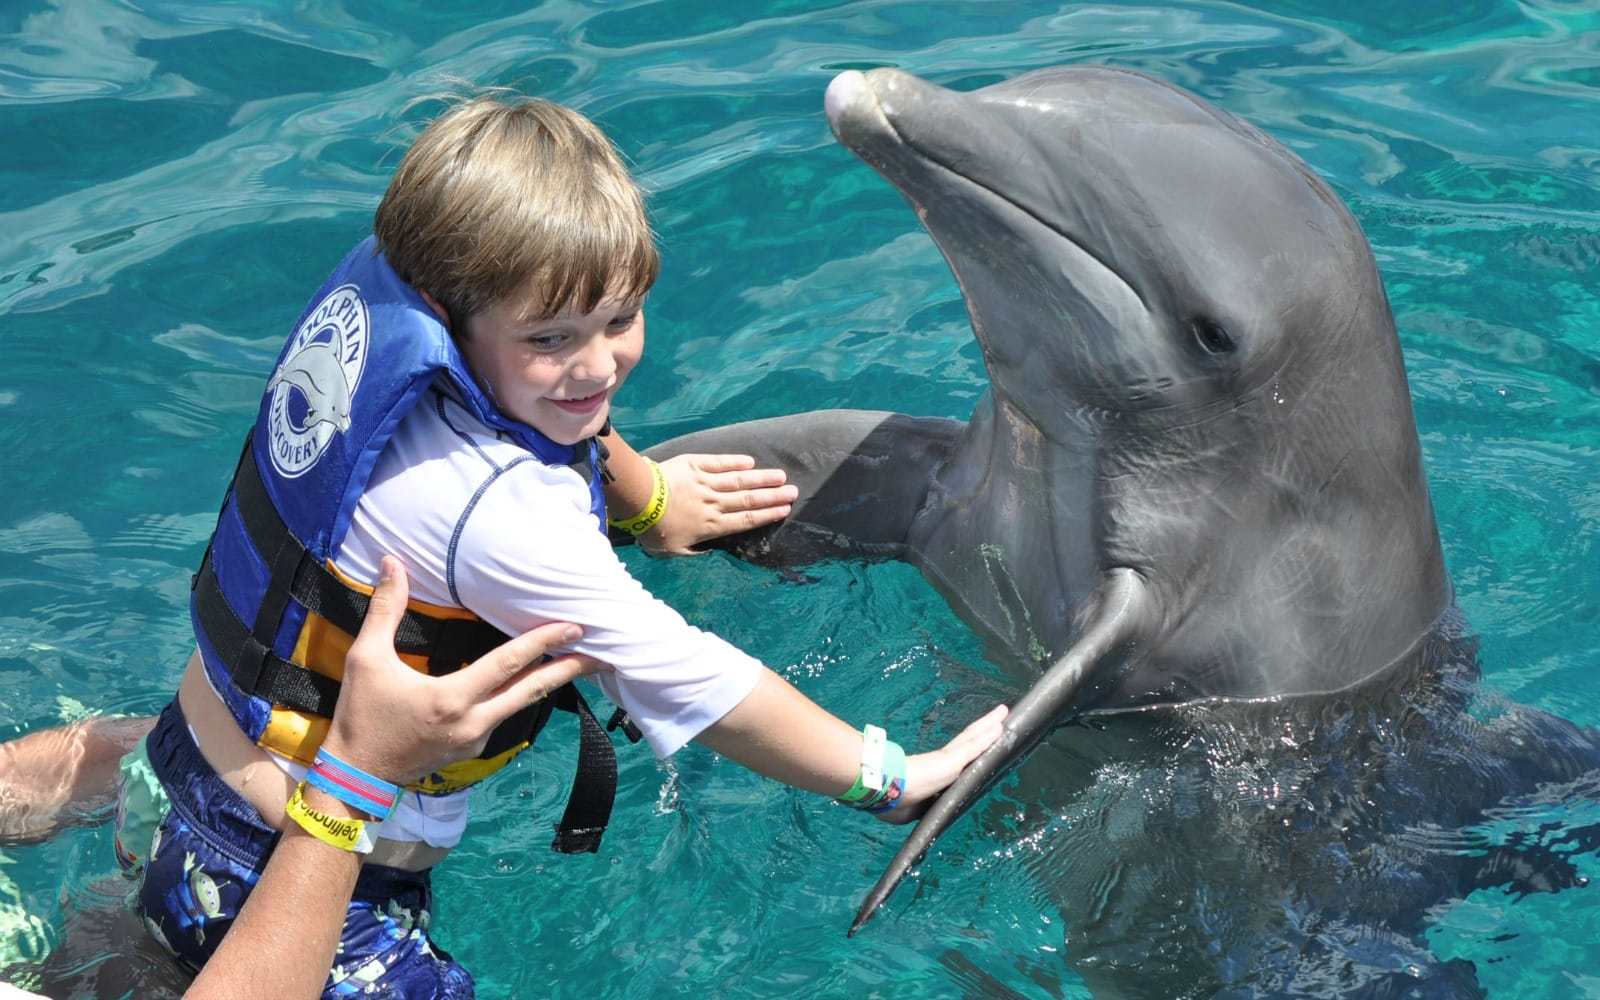 Kid putting hands on dolphin's flippers